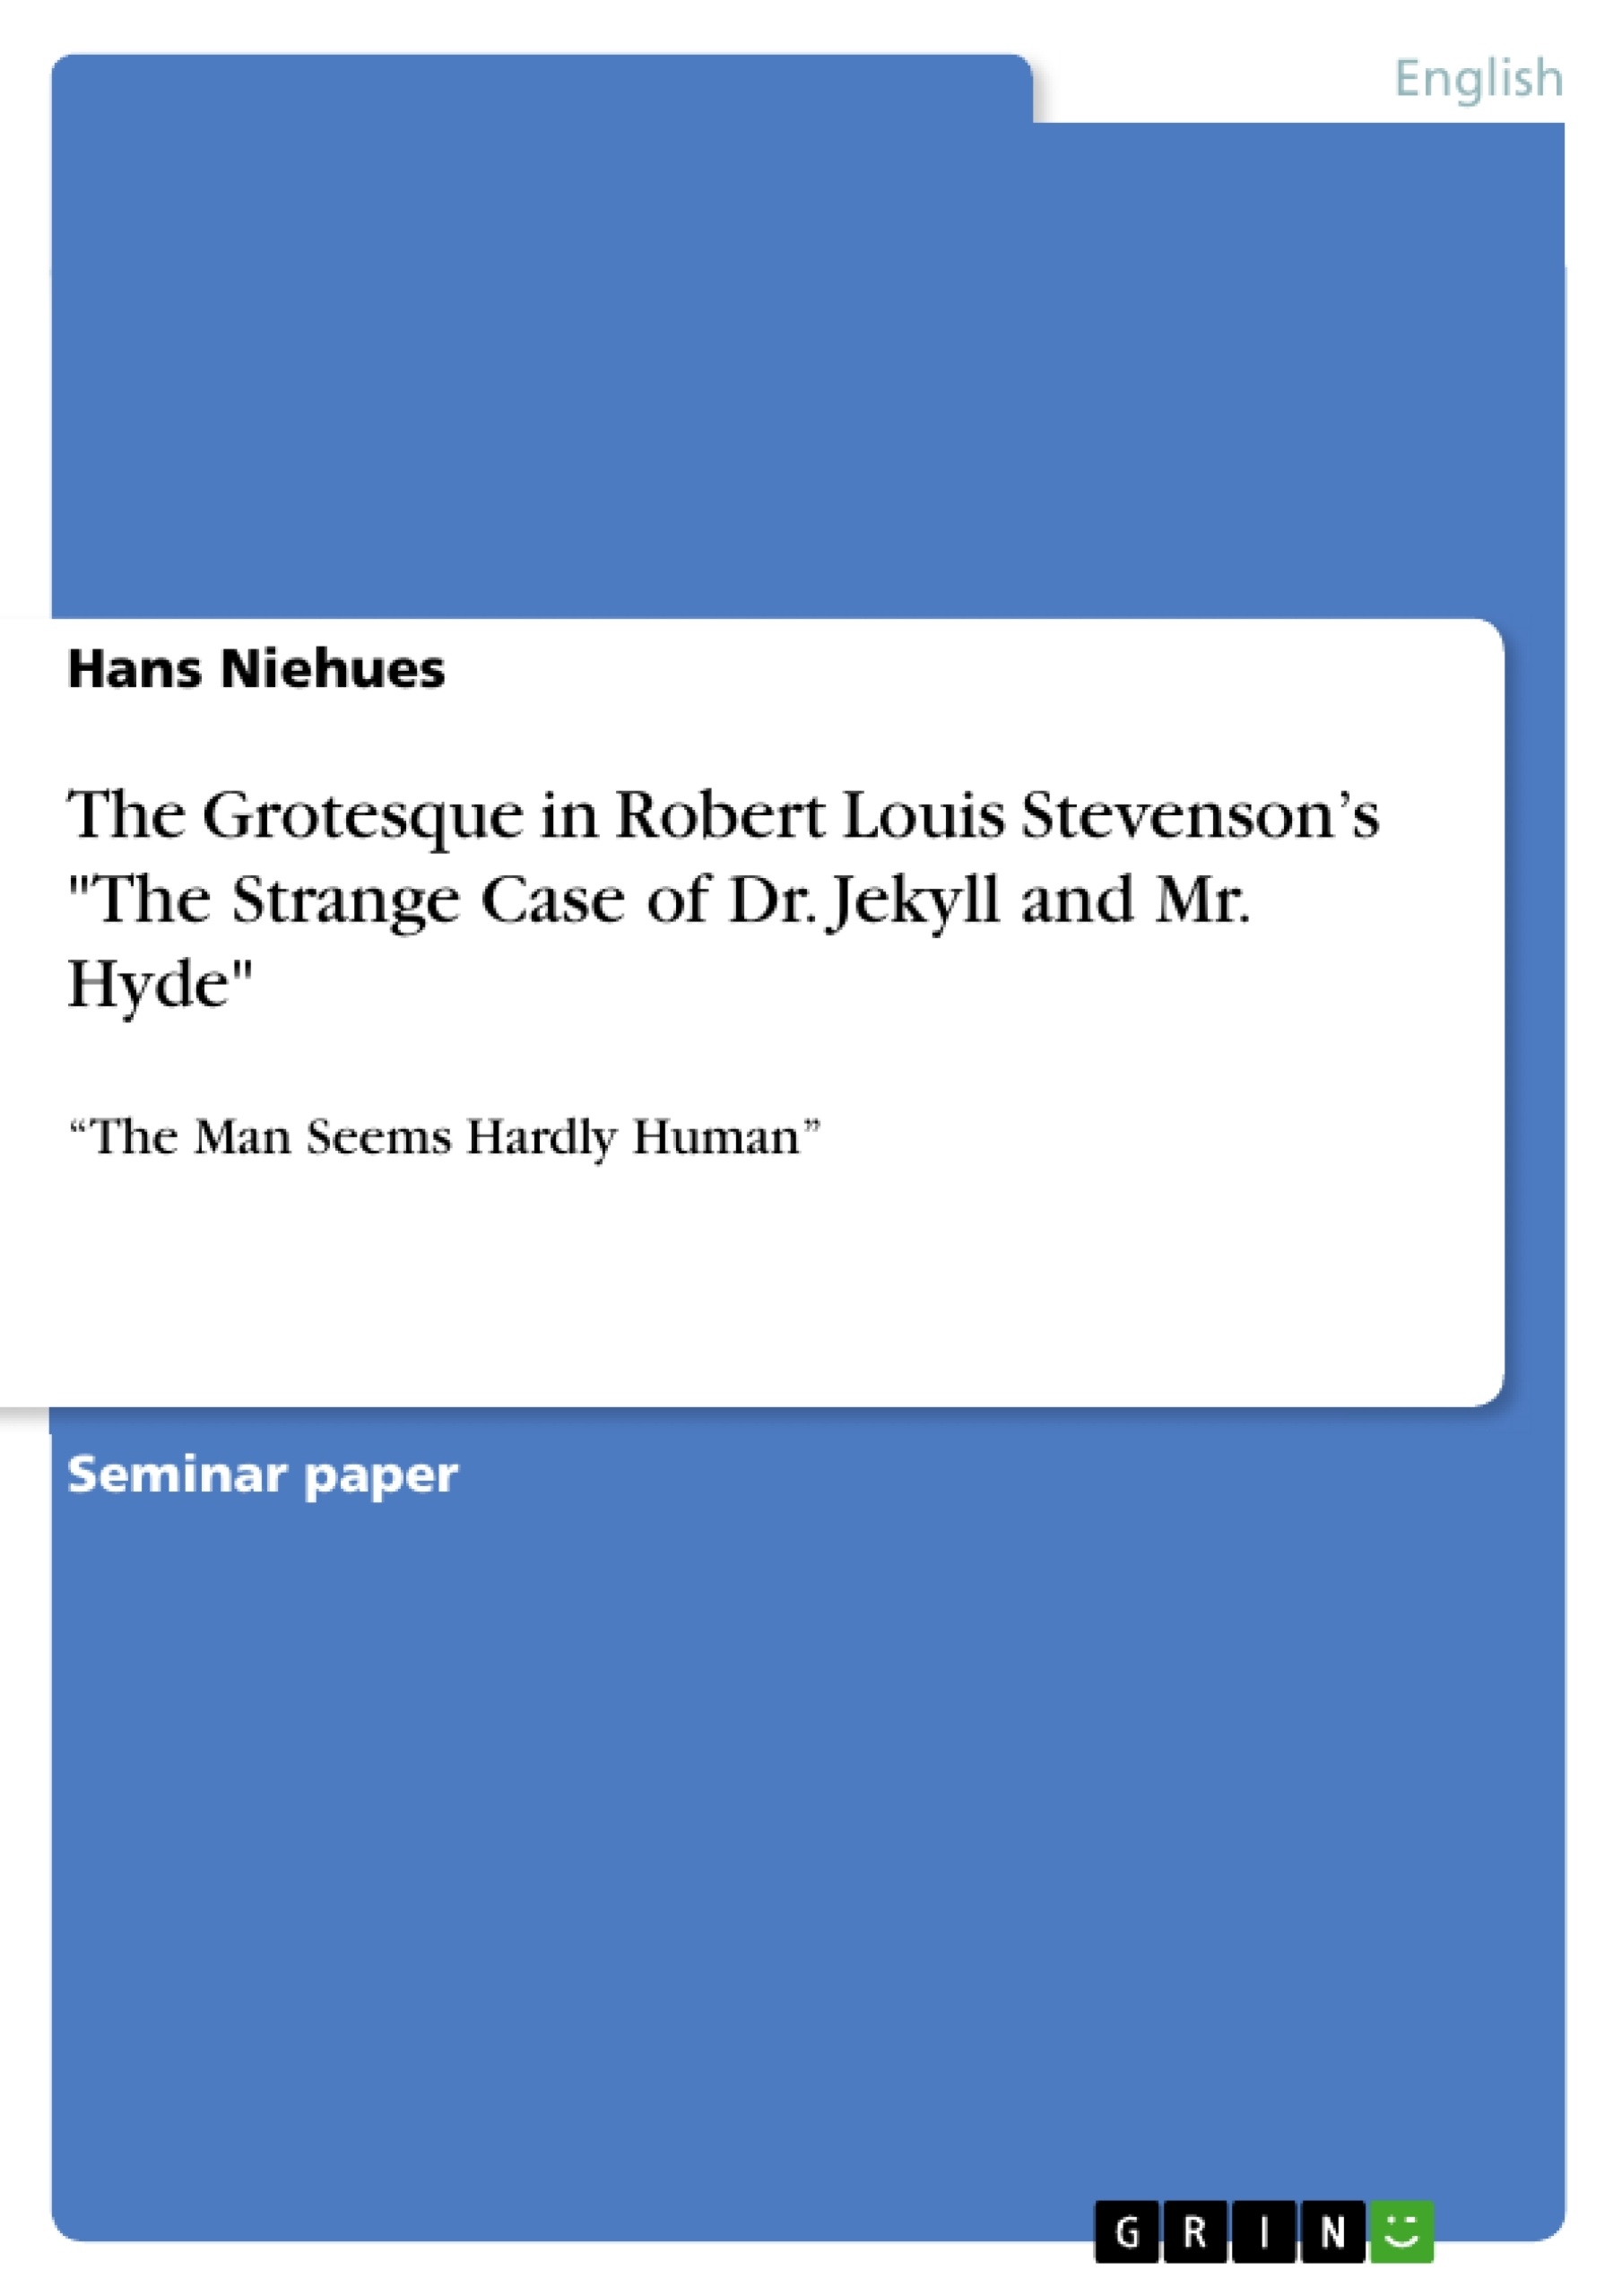 Titre: The Grotesque in Robert Louis Stevenson’s "The Strange Case of Dr. Jekyll and Mr. Hyde"